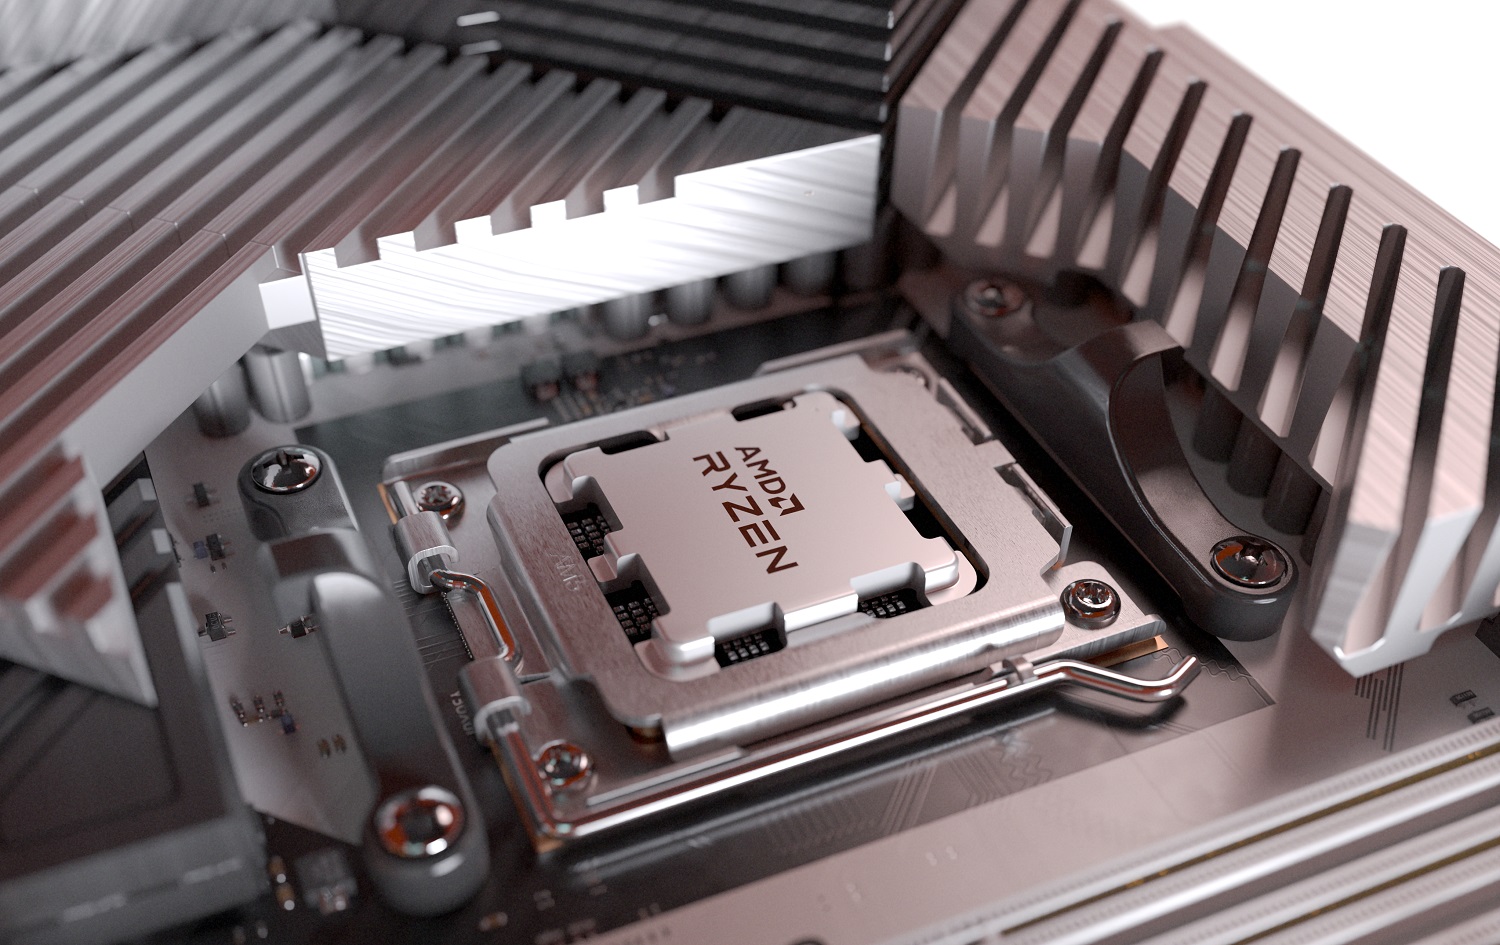 What should you Consider Before Buying A Gaming Motherboard?